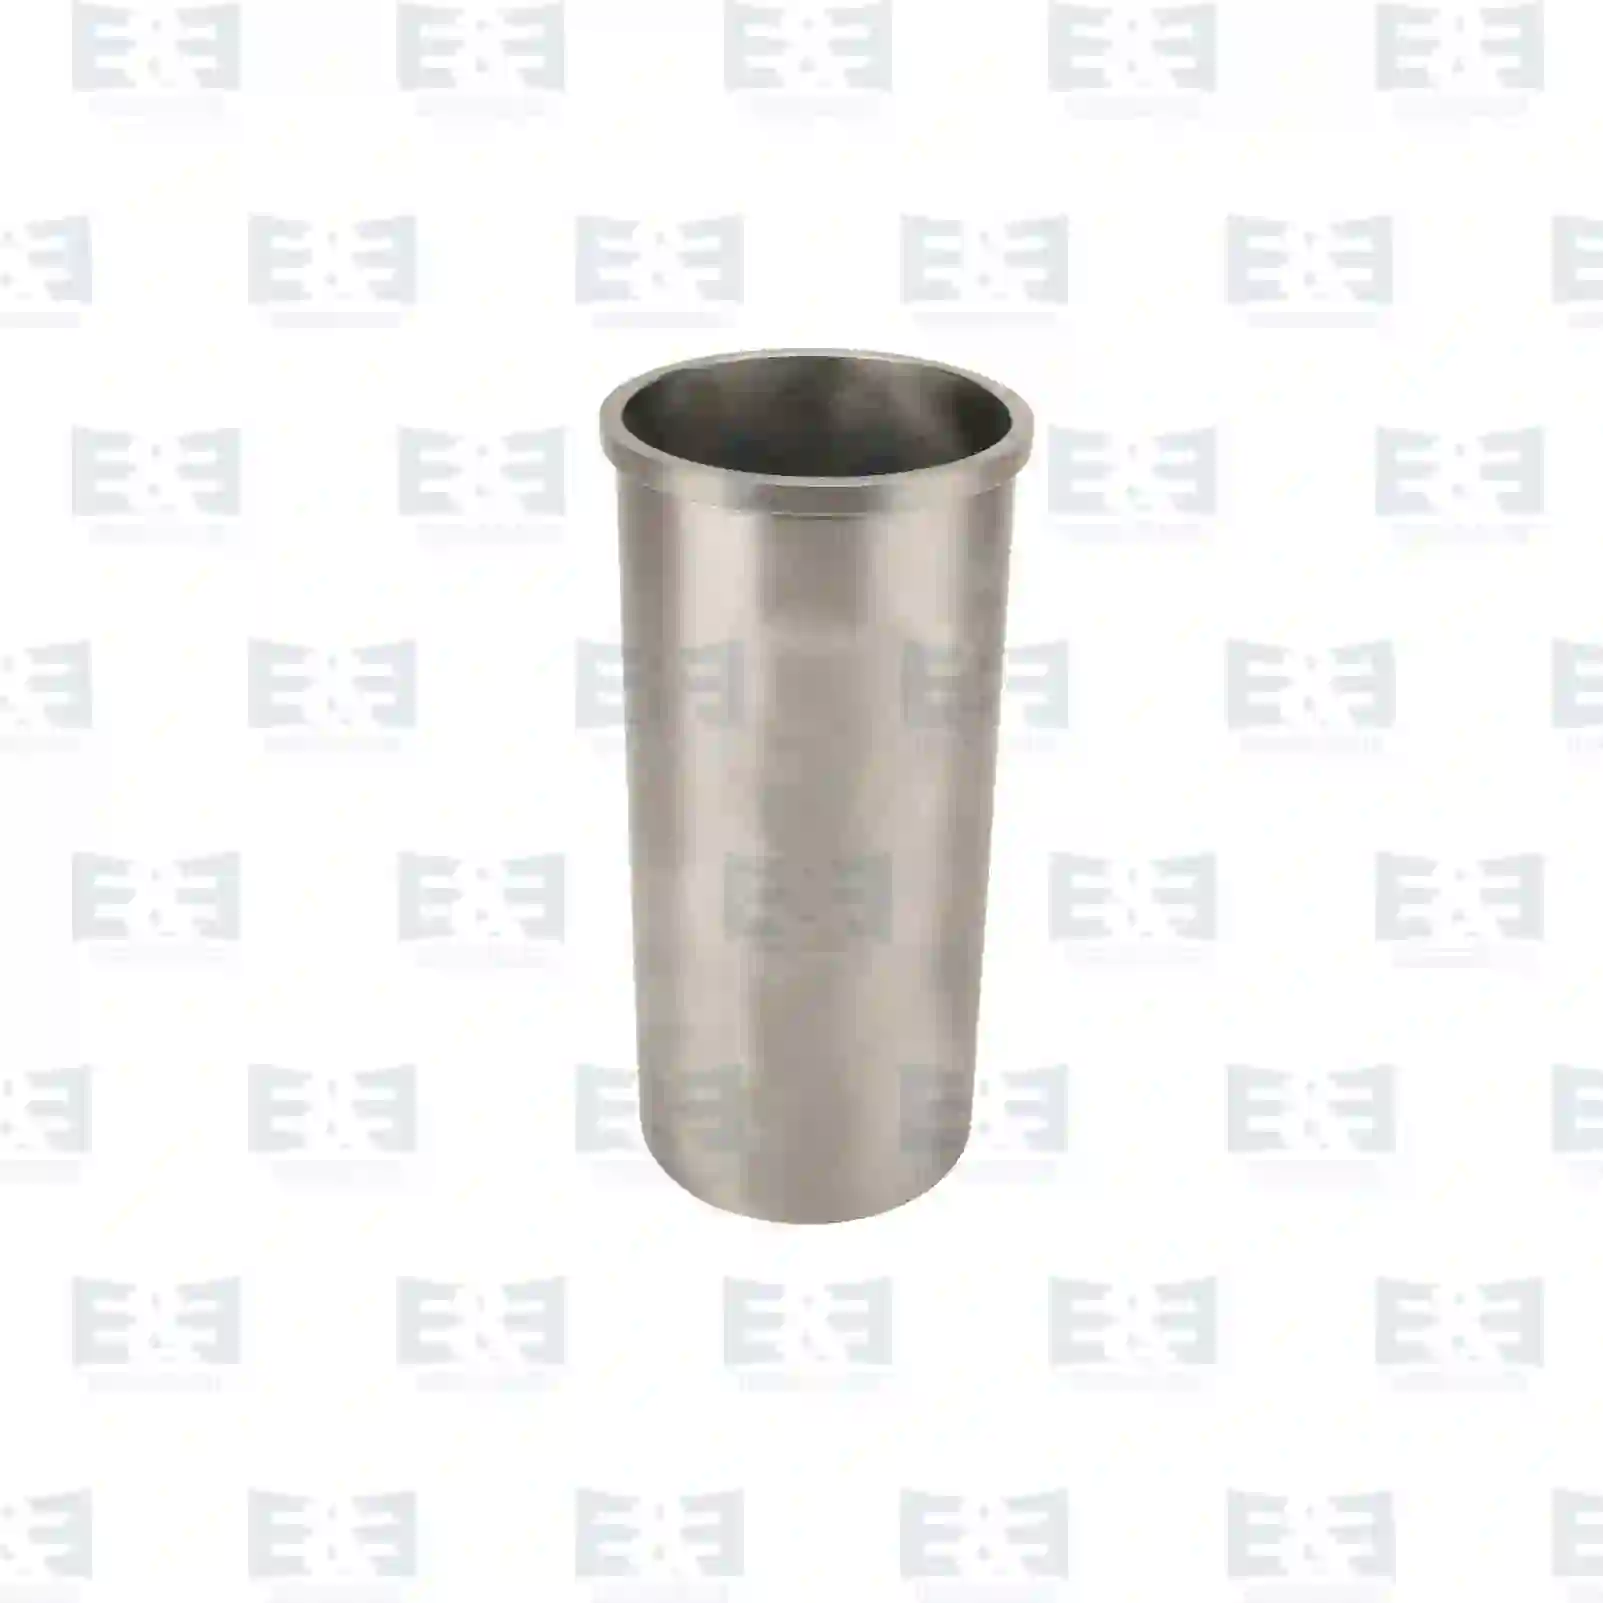 Cylinder liner, without seal rings, 2E2200903, 0112489, 0212275, 0220095, 112489, 212275, 220095 ||  2E2200903 E&E Truck Spare Parts | Truck Spare Parts, Auotomotive Spare Parts Cylinder liner, without seal rings, 2E2200903, 0112489, 0212275, 0220095, 112489, 212275, 220095 ||  2E2200903 E&E Truck Spare Parts | Truck Spare Parts, Auotomotive Spare Parts